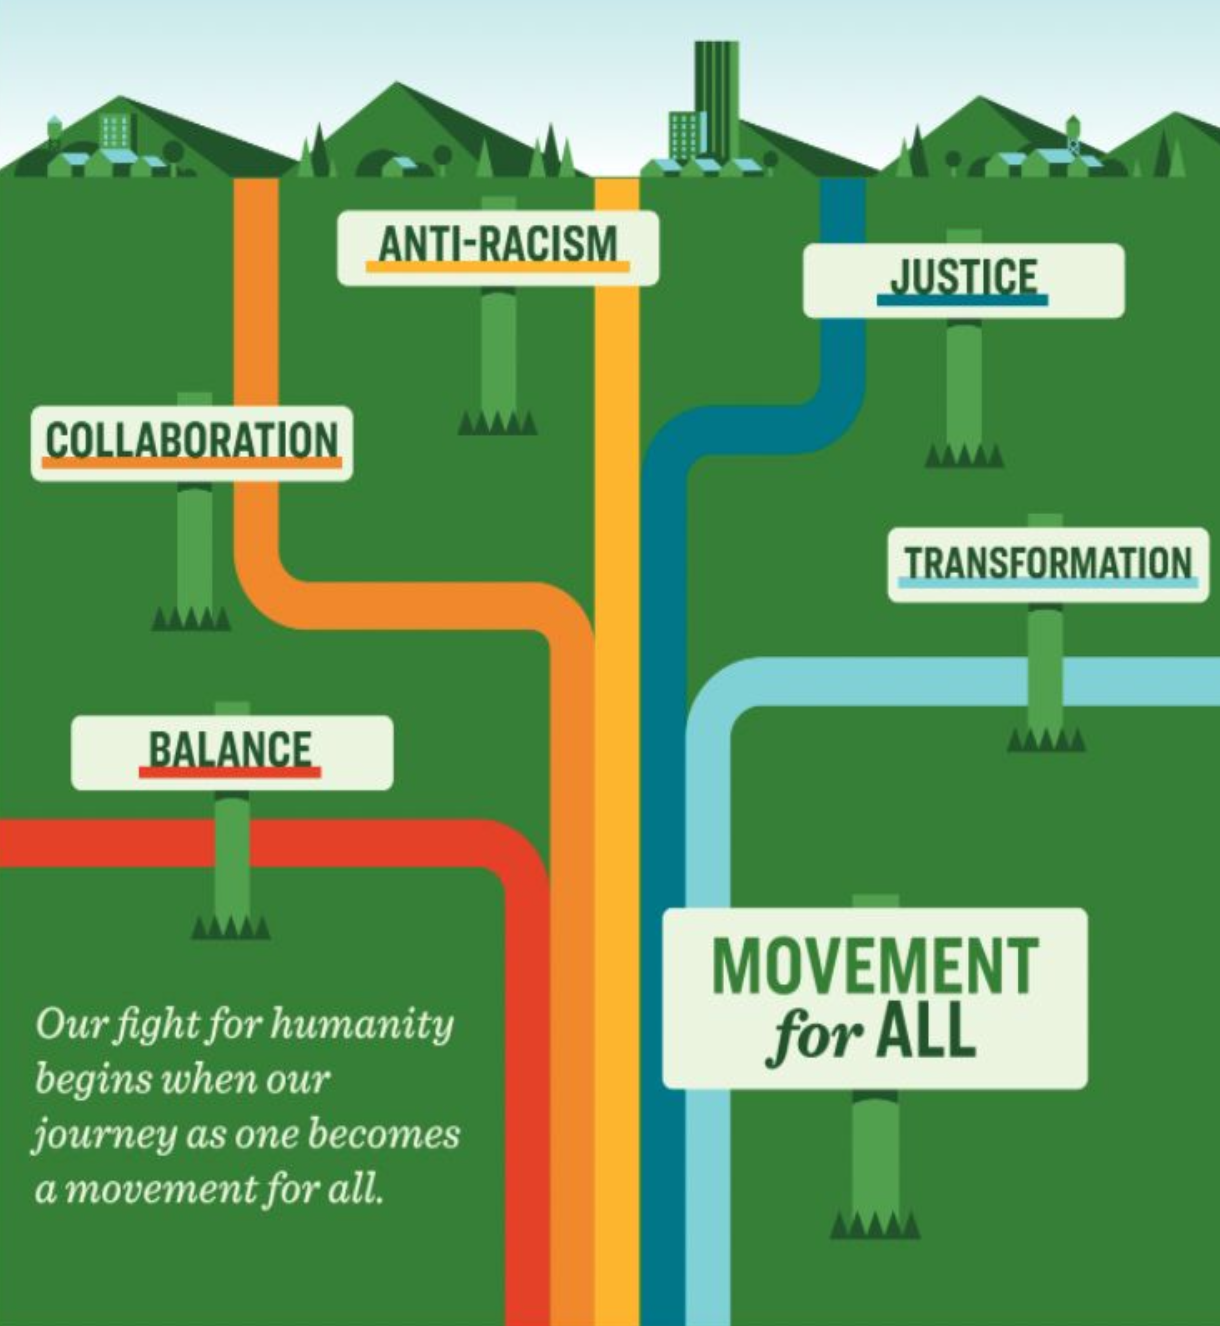 Image with all Sierra Club Core Values listed on it